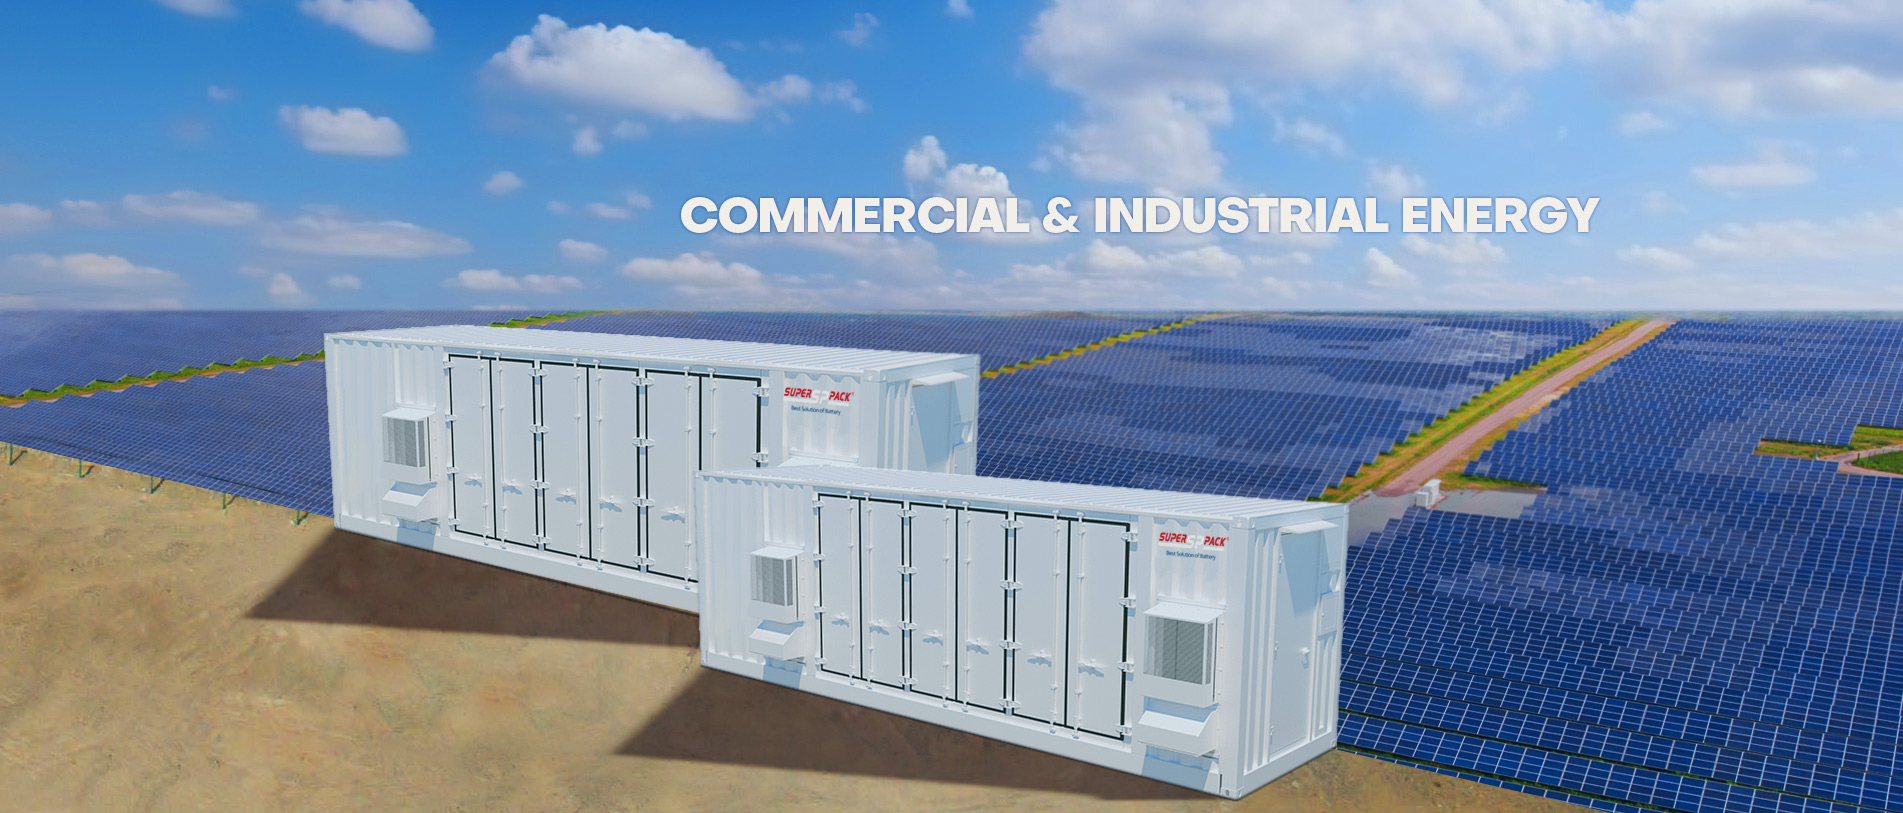 COMMERCIAL & INDUSTRIAL ENERGY